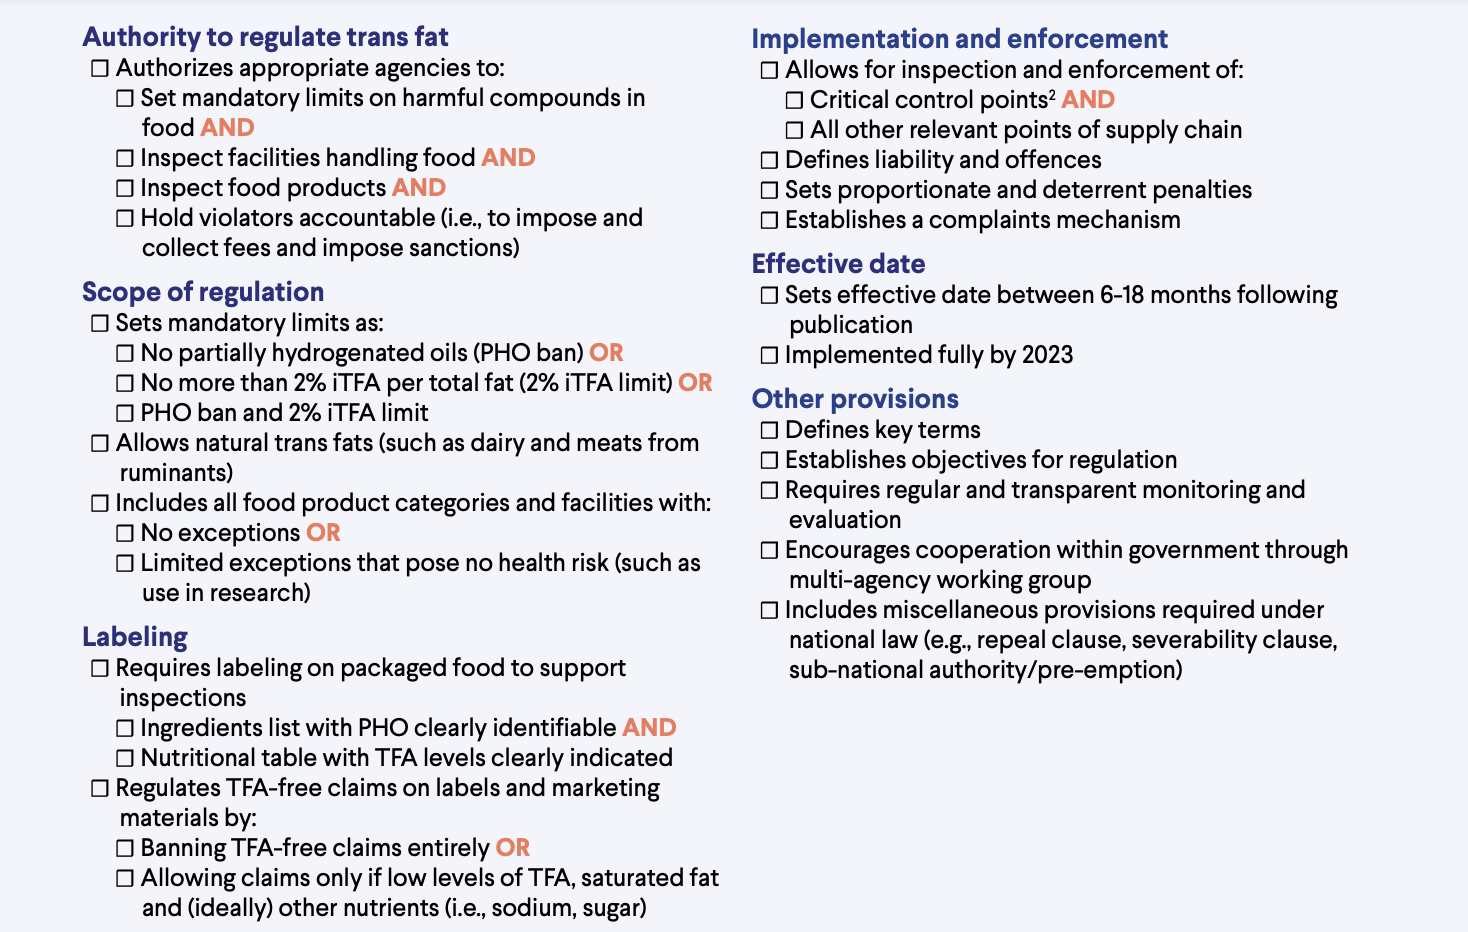 Resolve to Save Lives Trans Fat Policy Inventory Checklist (Image)